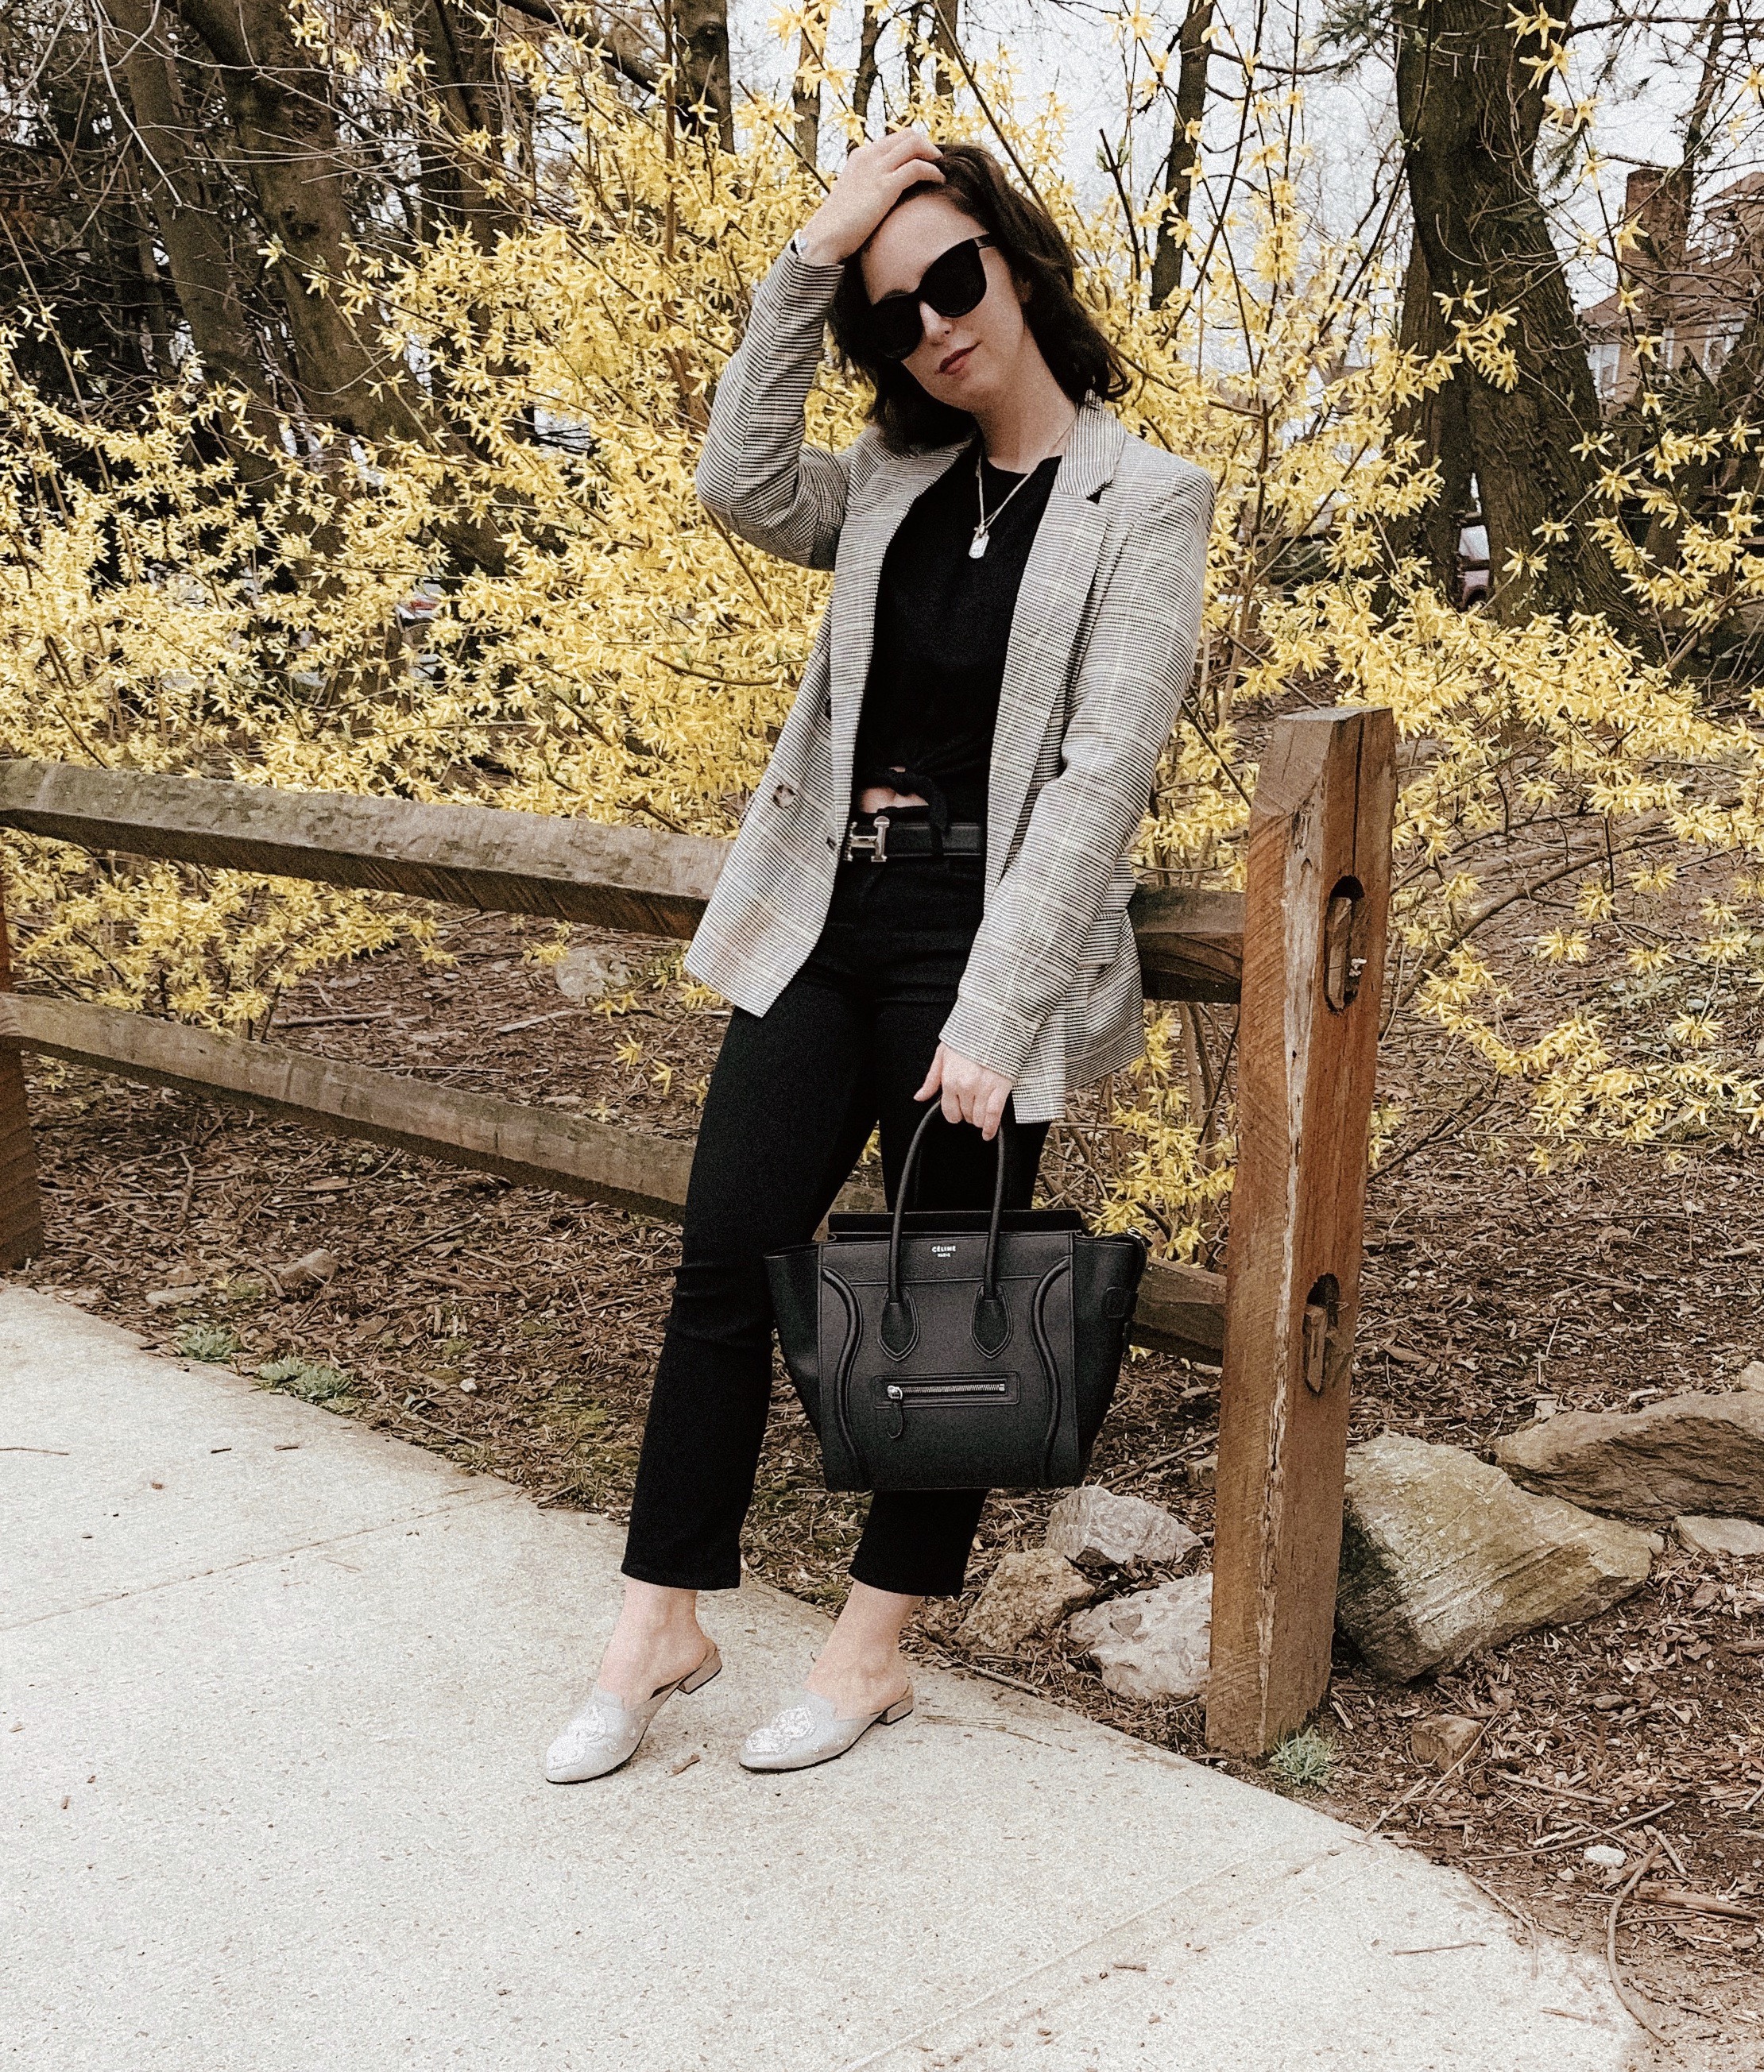 5 Tips For Capturing The Best Instagram Photos Using Your iPhone-Outfit-Style-Inspo-Westchester-Photography-Blazer #fashion #outfit #bloggerstyle #springstyle #photography #iphone #lightroom #oldceline